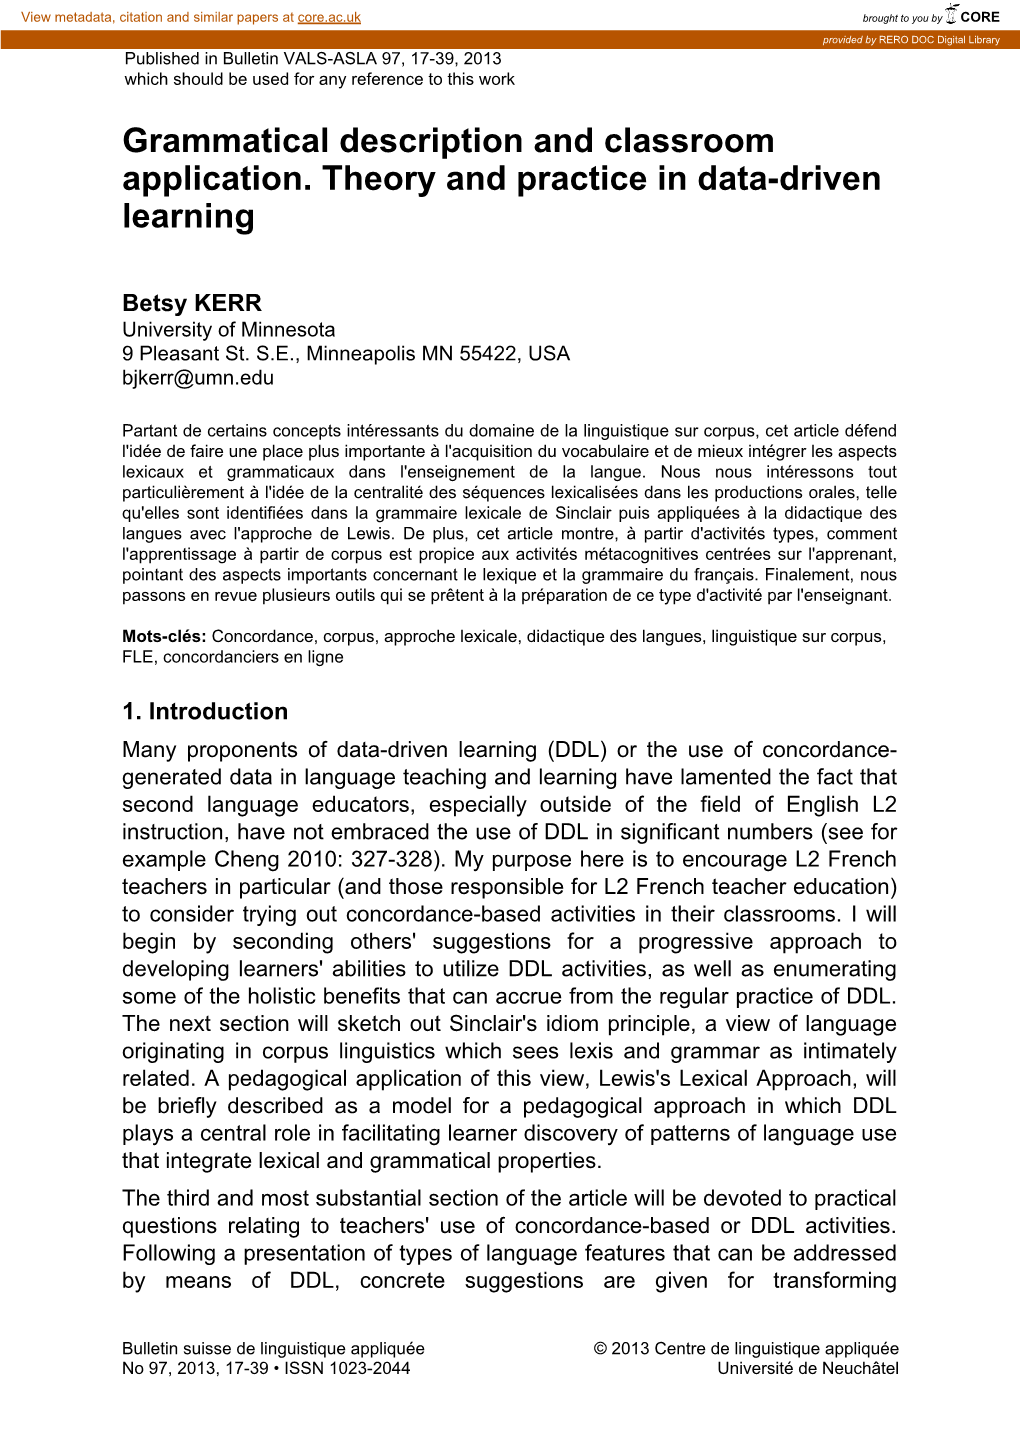 Grammatical Description and Classroom Application. Theory and Practice in Data-Driven Learning